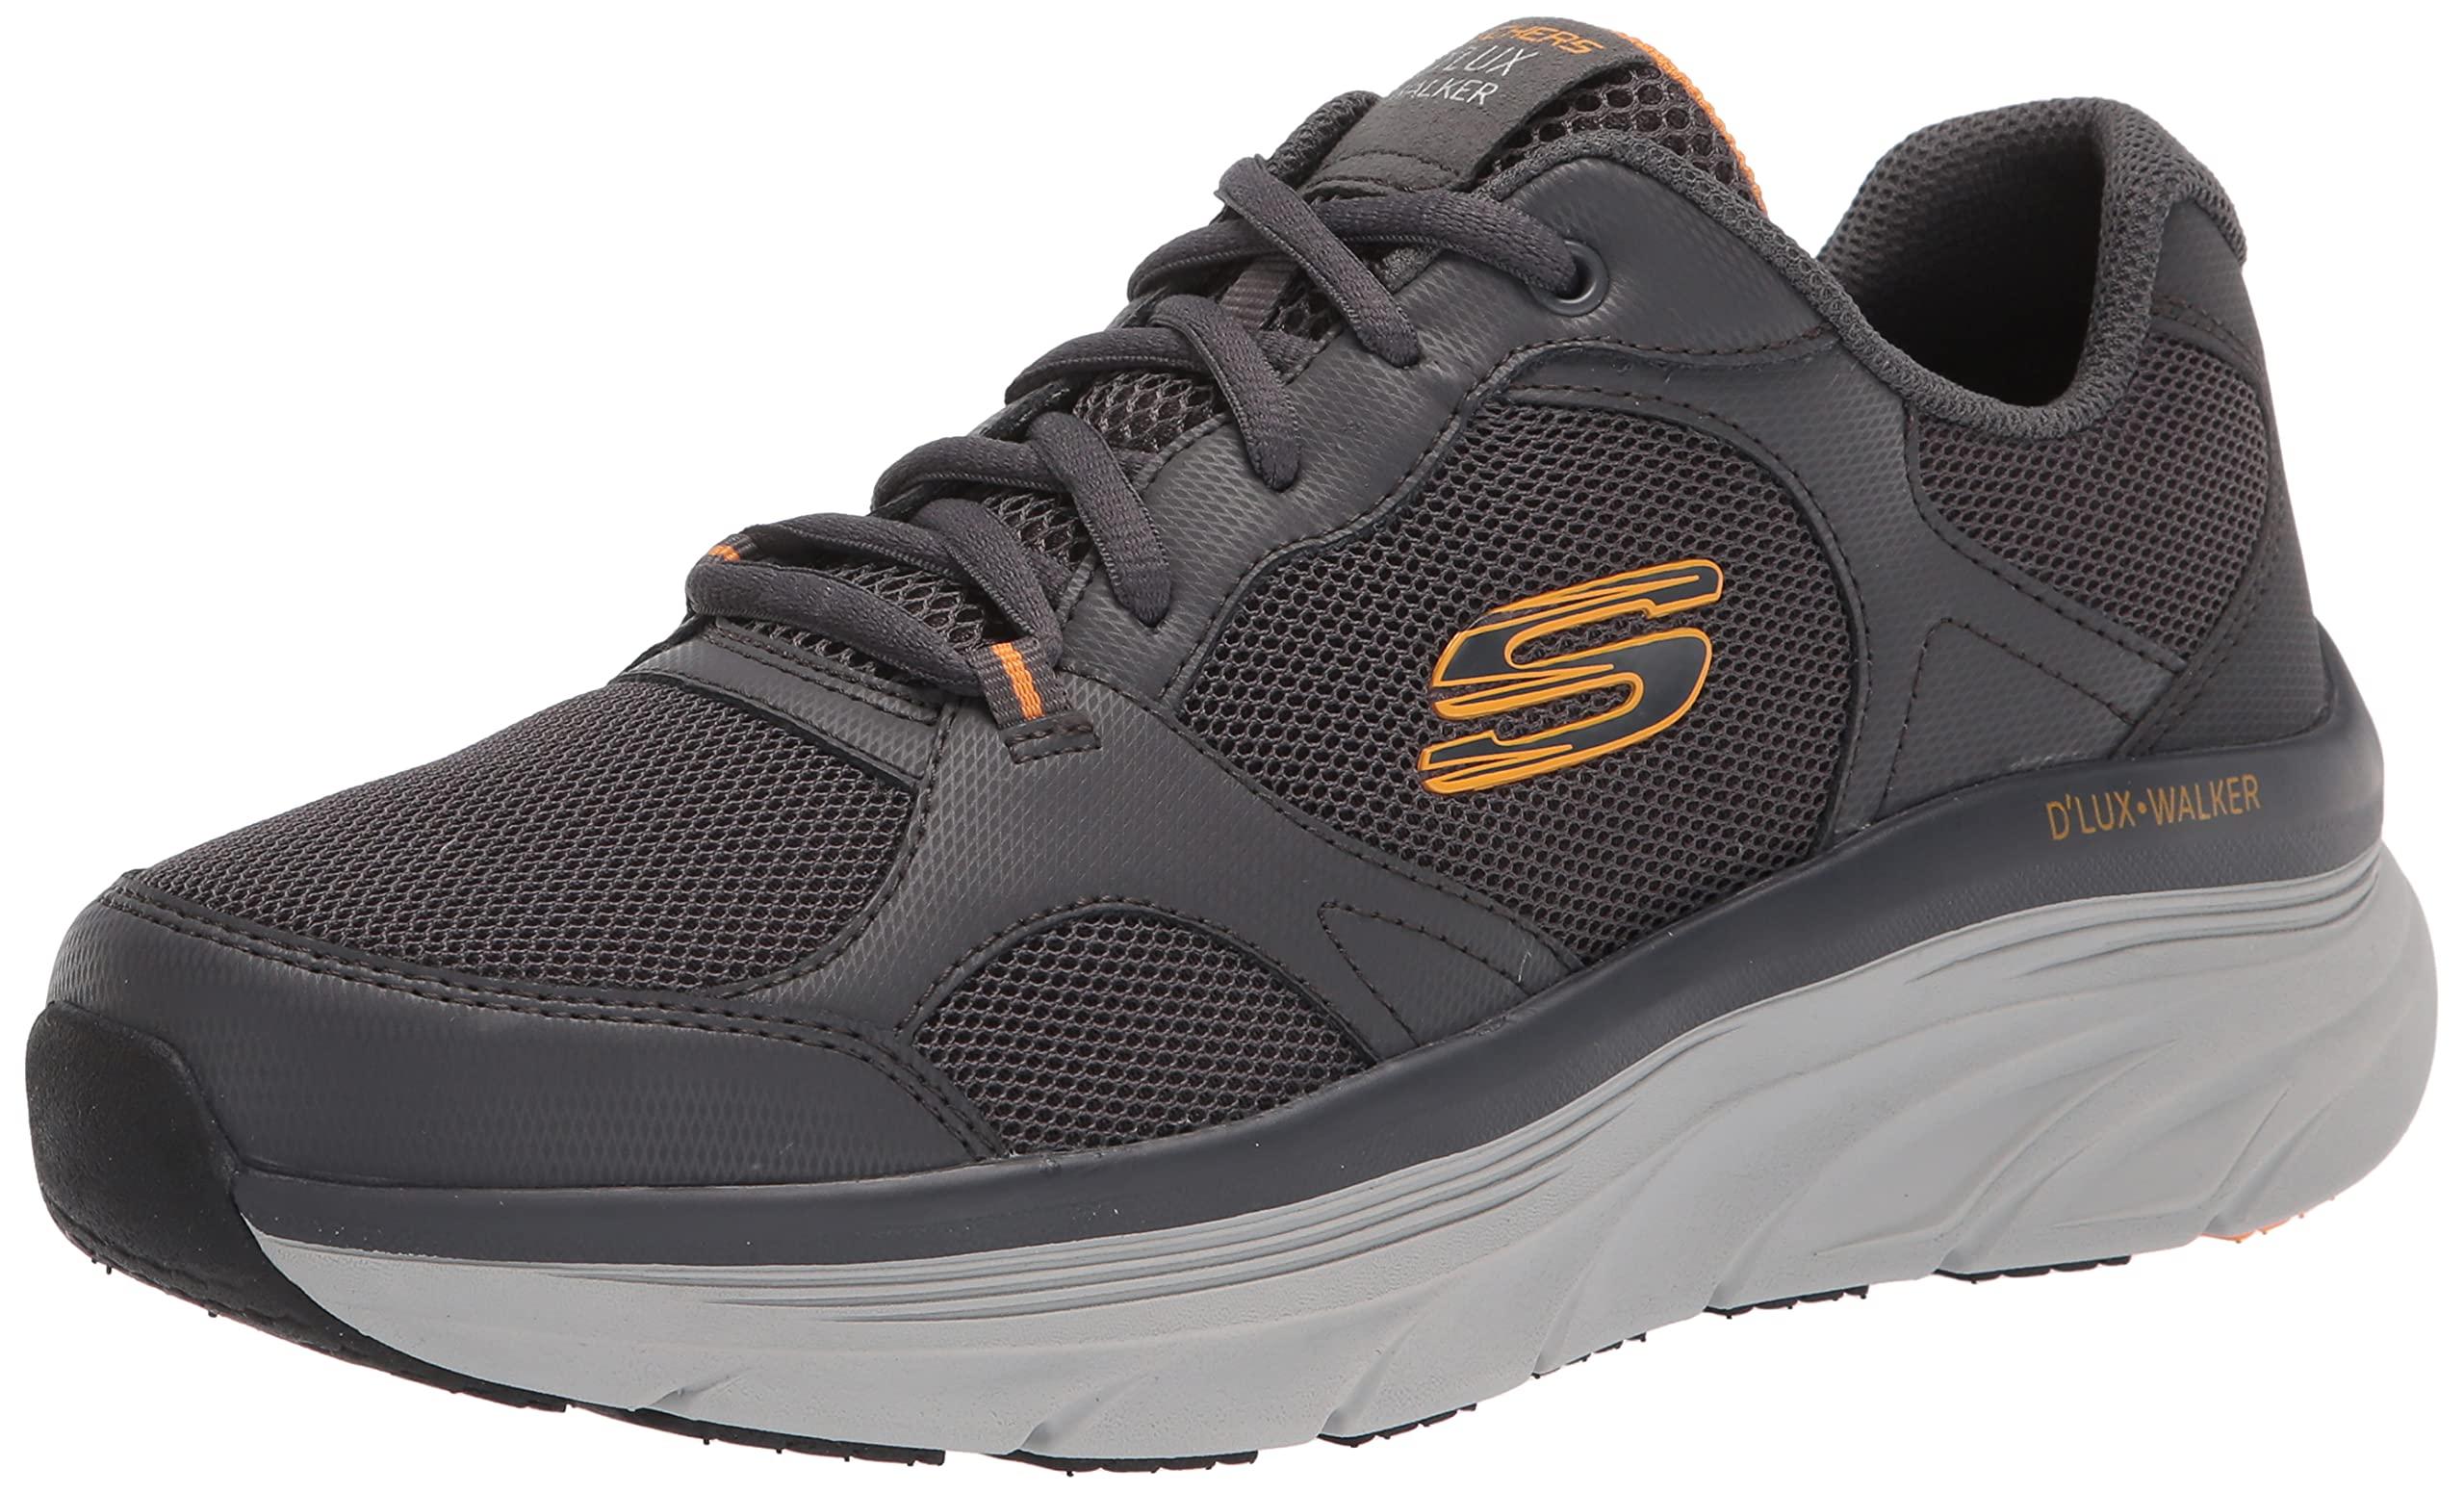 Skechers D'lux Walker Mainstream Oxford in Charcoal/Orange (Gray) for Men -  Save 30% - Lyst